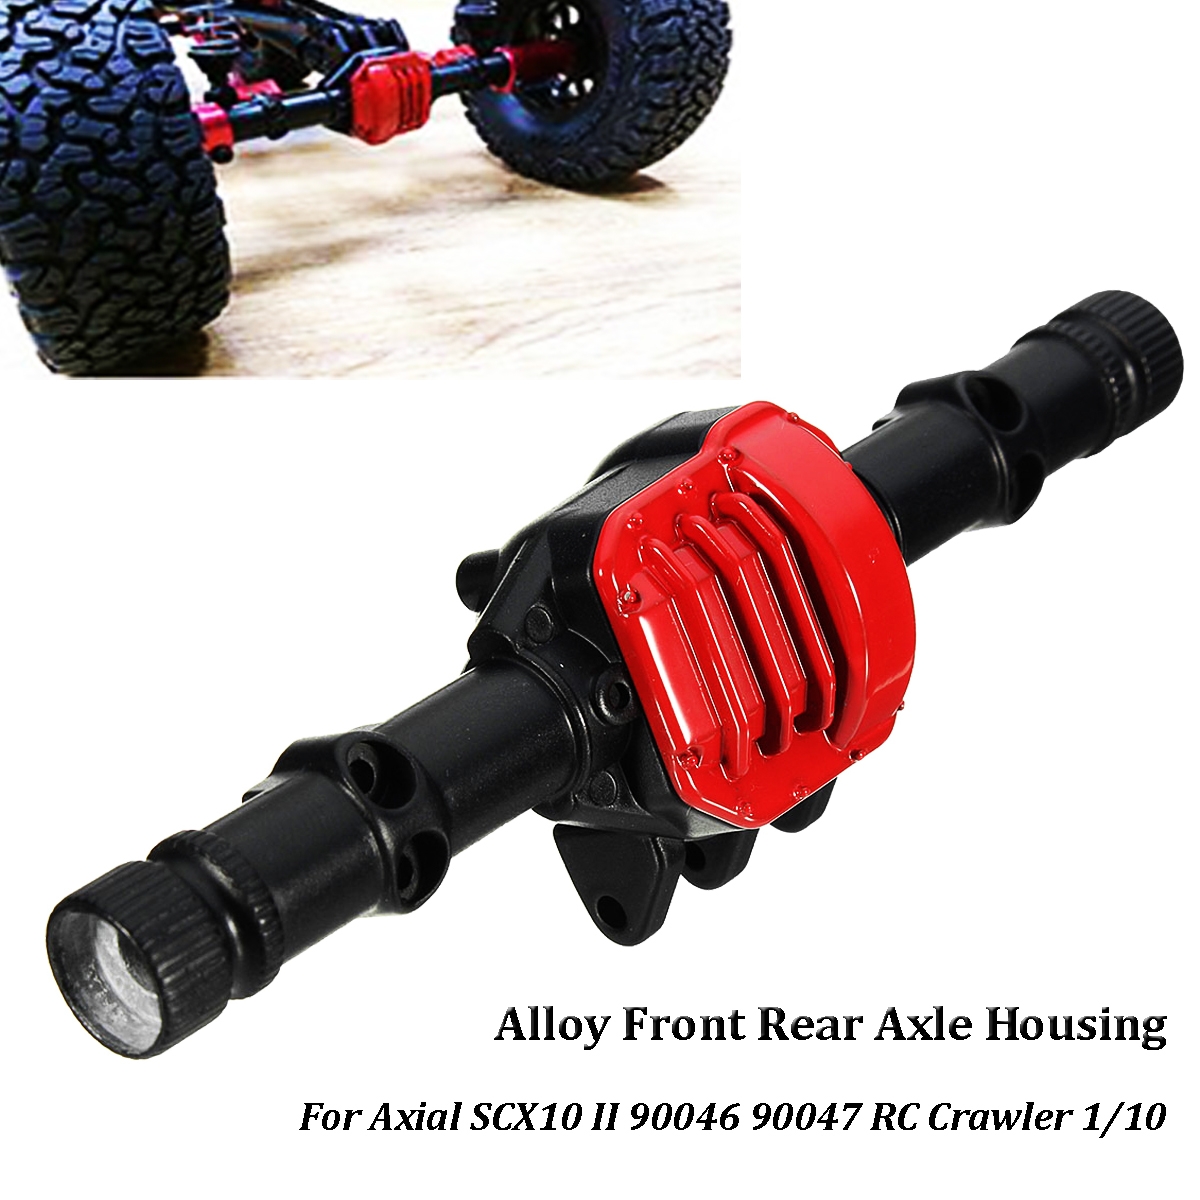 Alloy Front Rear Axle Axial Housing For 1/10 SCX10 II 90046 90047 RC Crawler Car Part